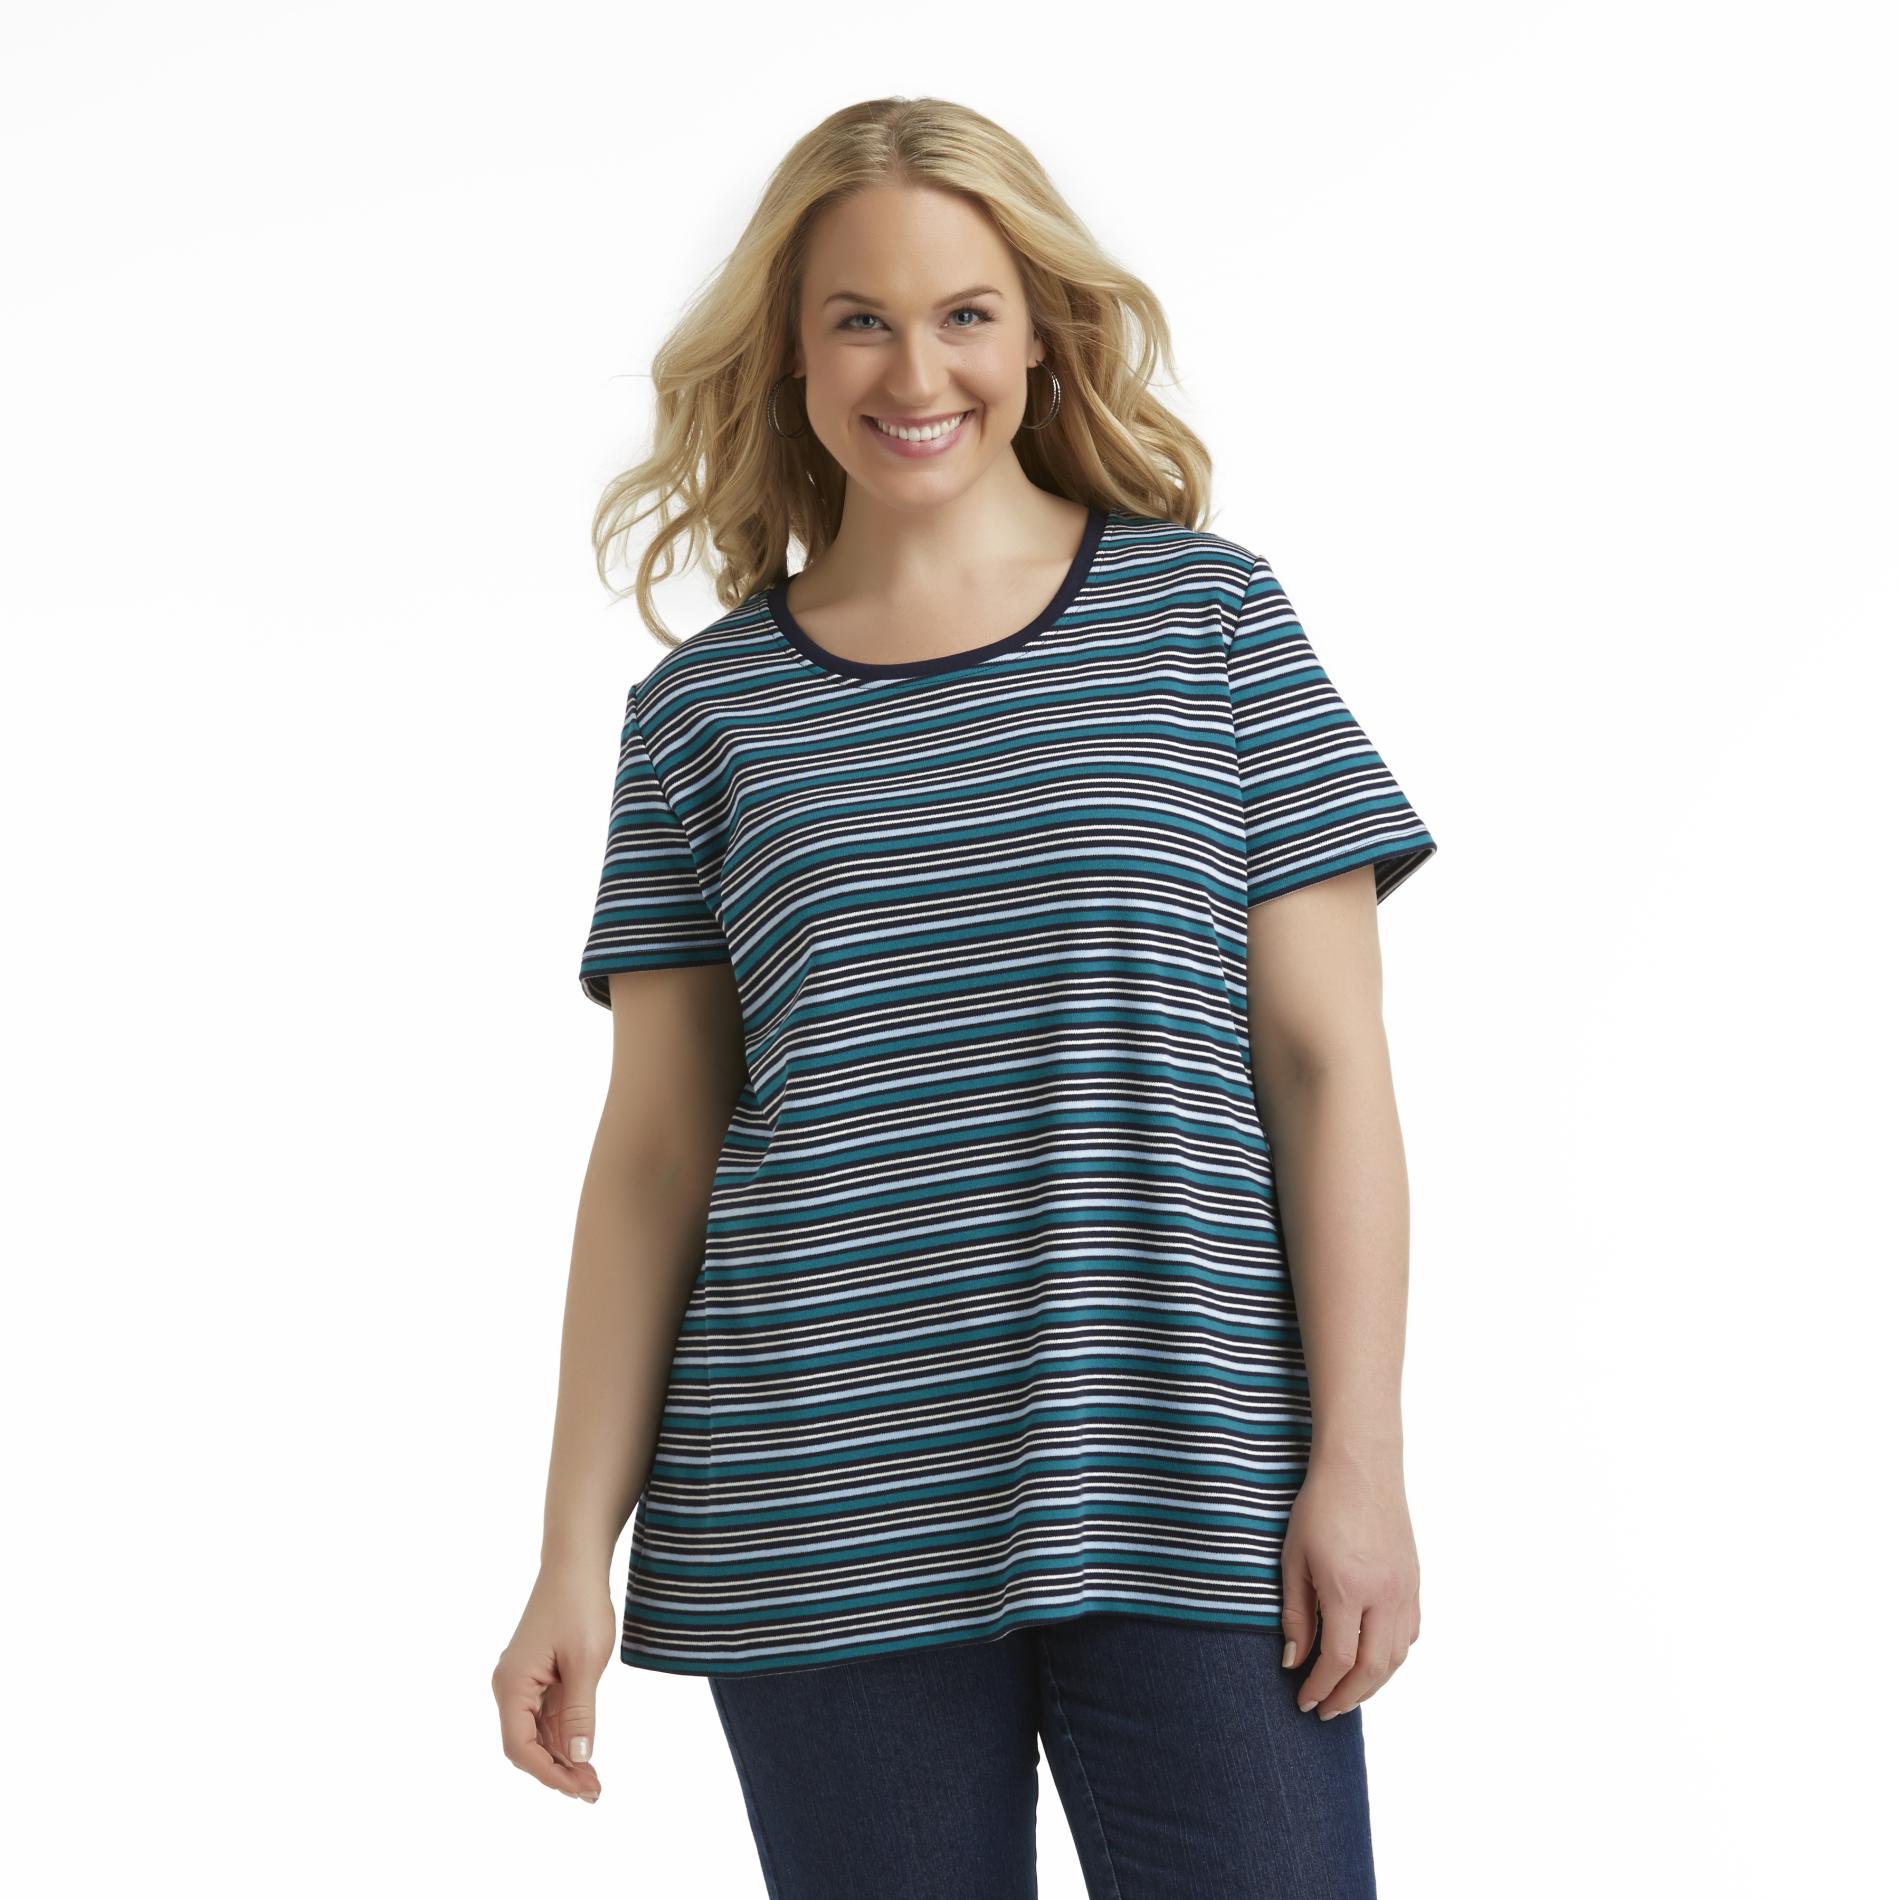 Basic Editions Women's Plus Relaxed-Fit T-Shirt - Striped